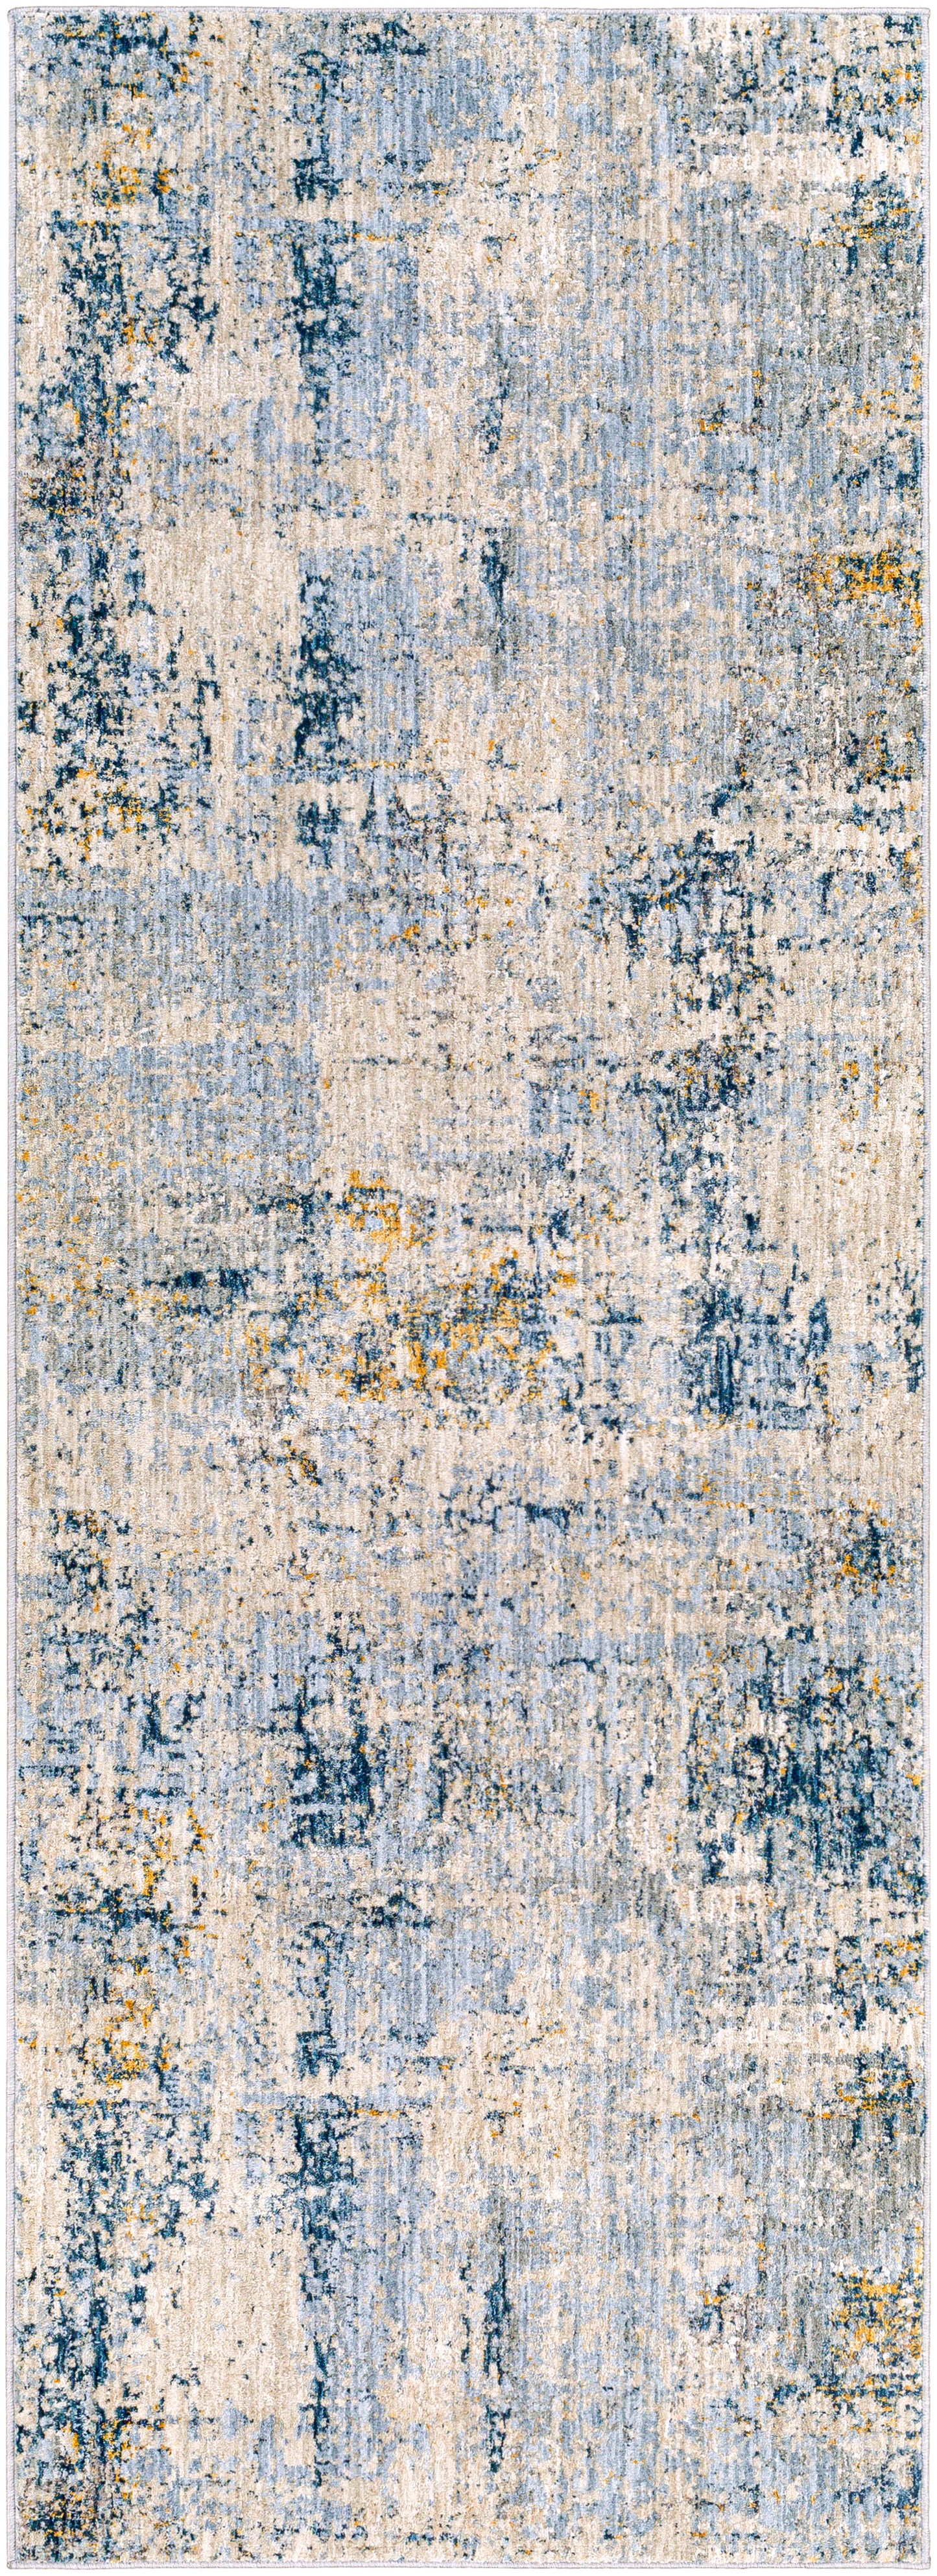 Laila 27797 Machine Woven Synthetic Blend Indoor Area Rug by Surya Rugs